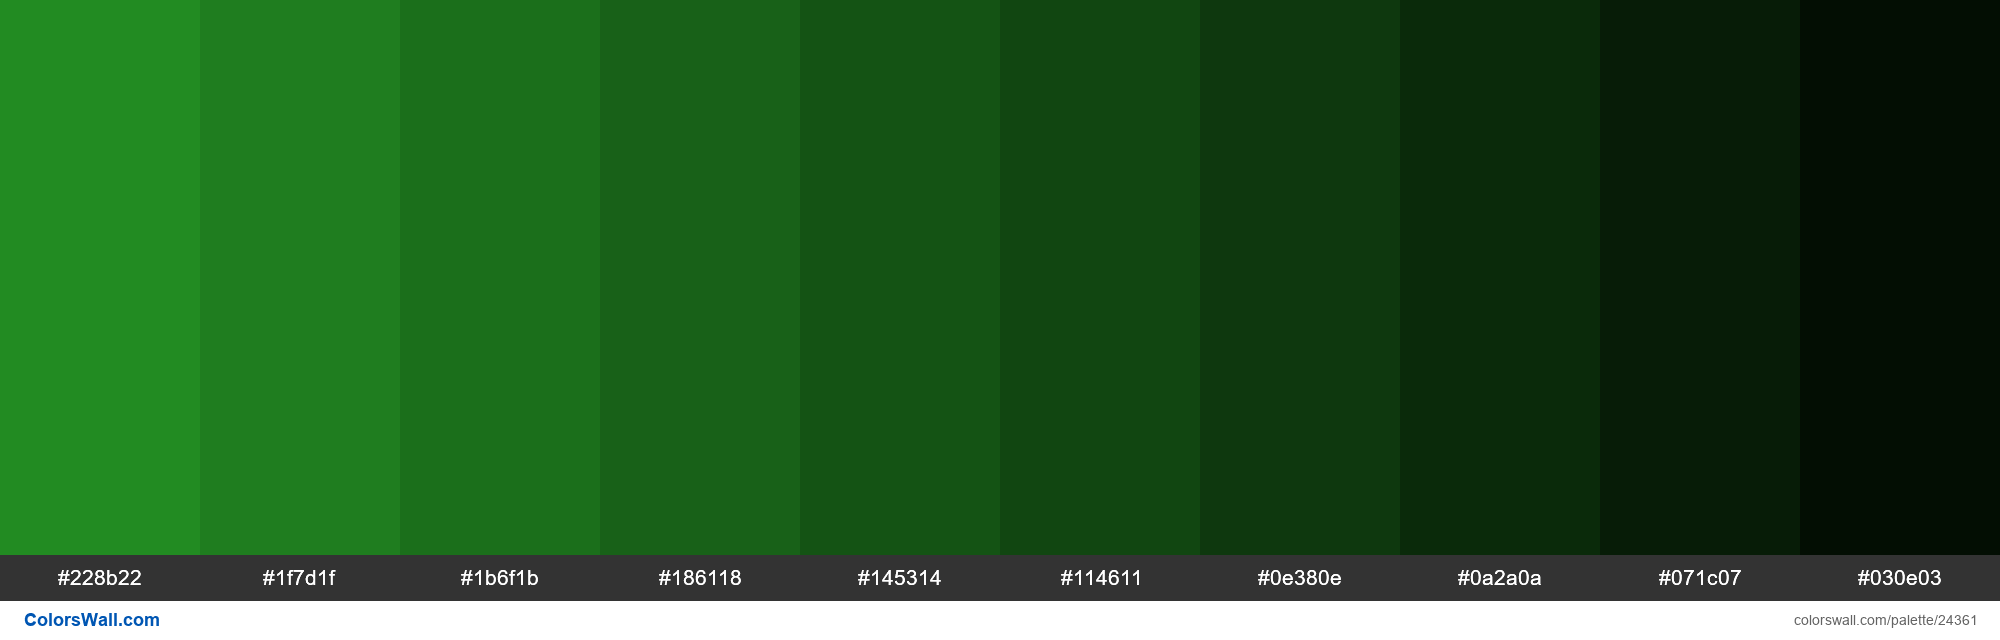 colorswall on X: Shades of Forest Green #228B22 hex color #228b22